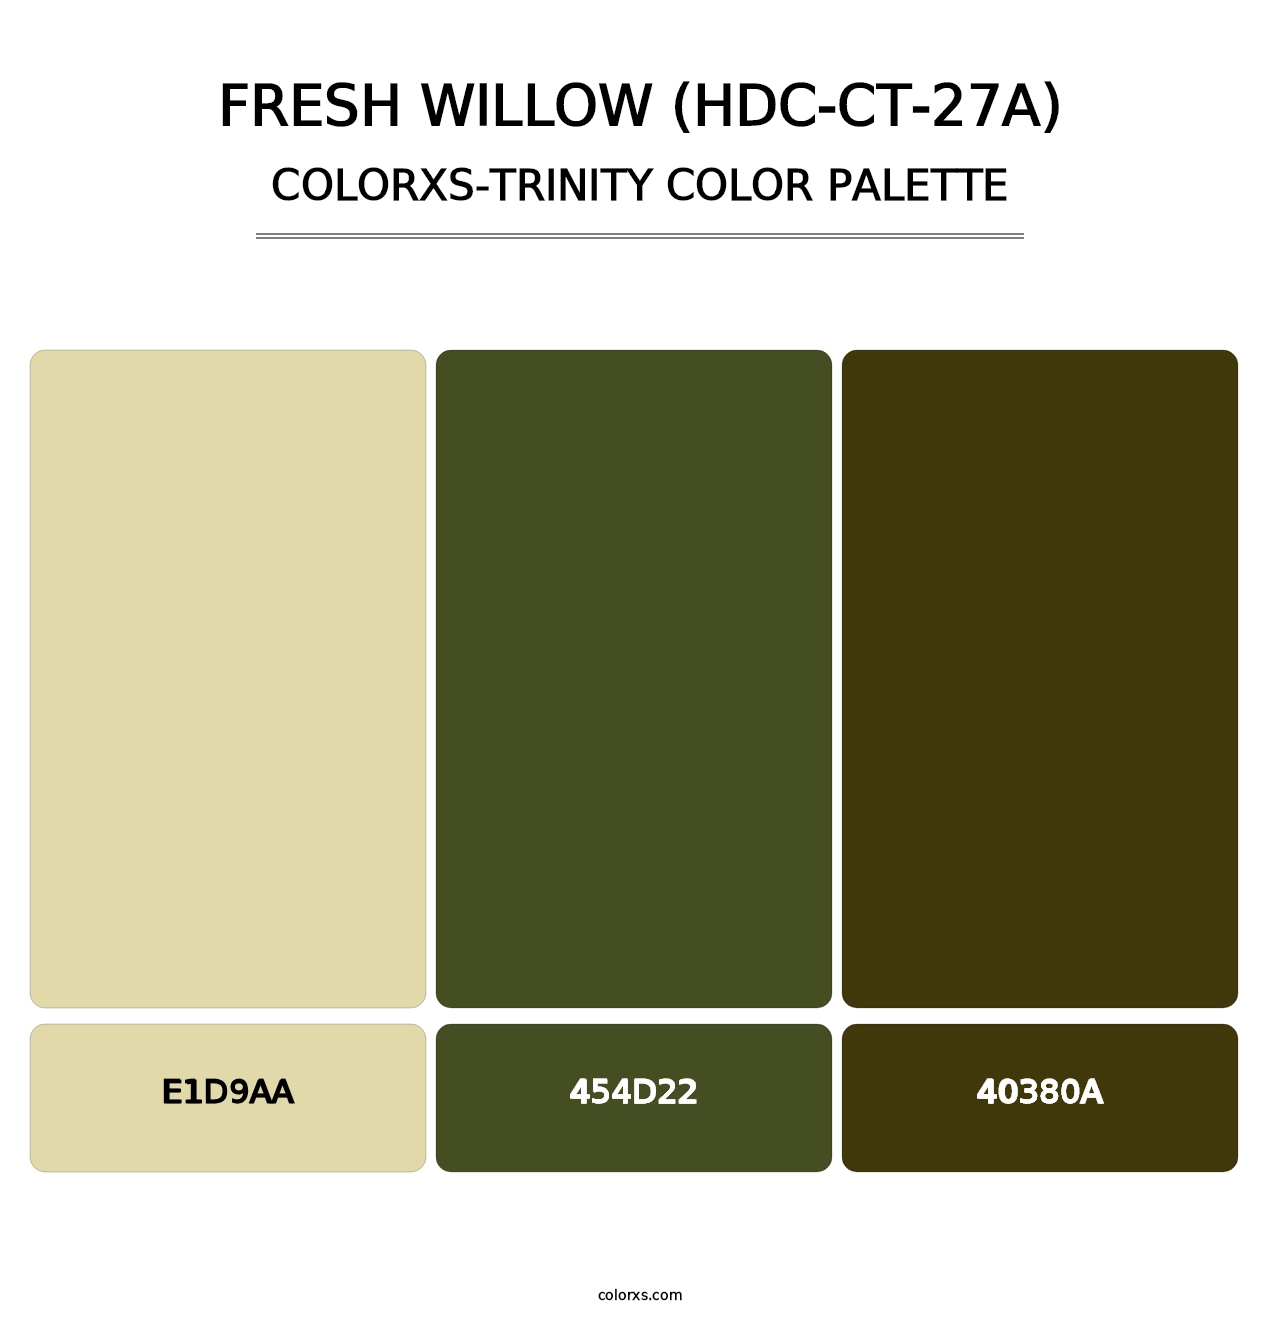 Fresh Willow (HDC-CT-27A) - Colorxs Trinity Palette